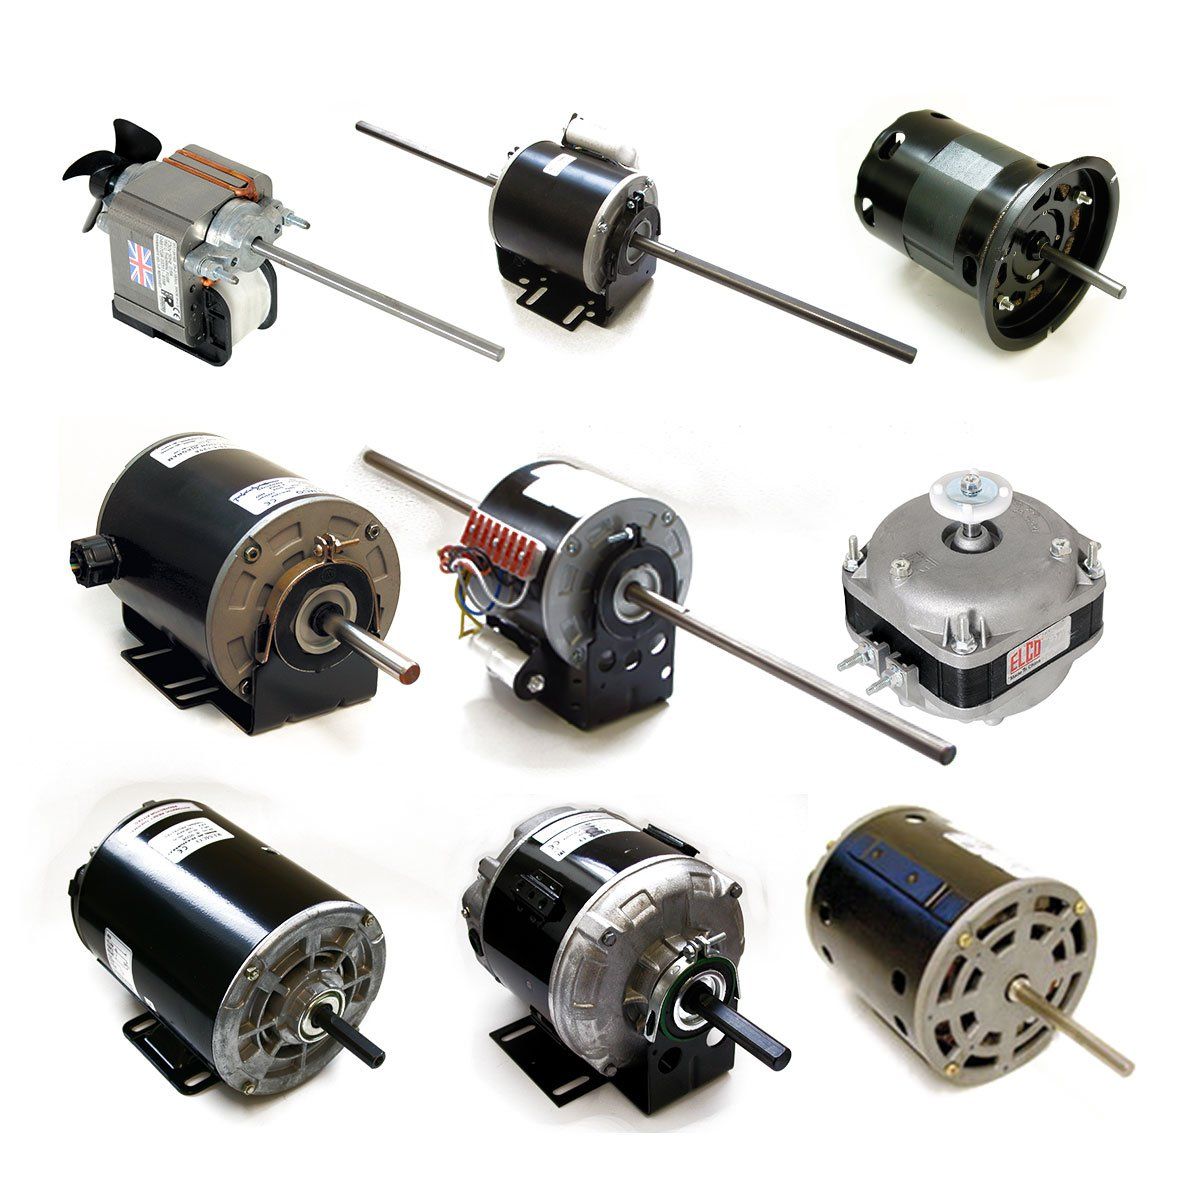 Electric Motor Part — Different Electric Motor Products in Tampa, FL